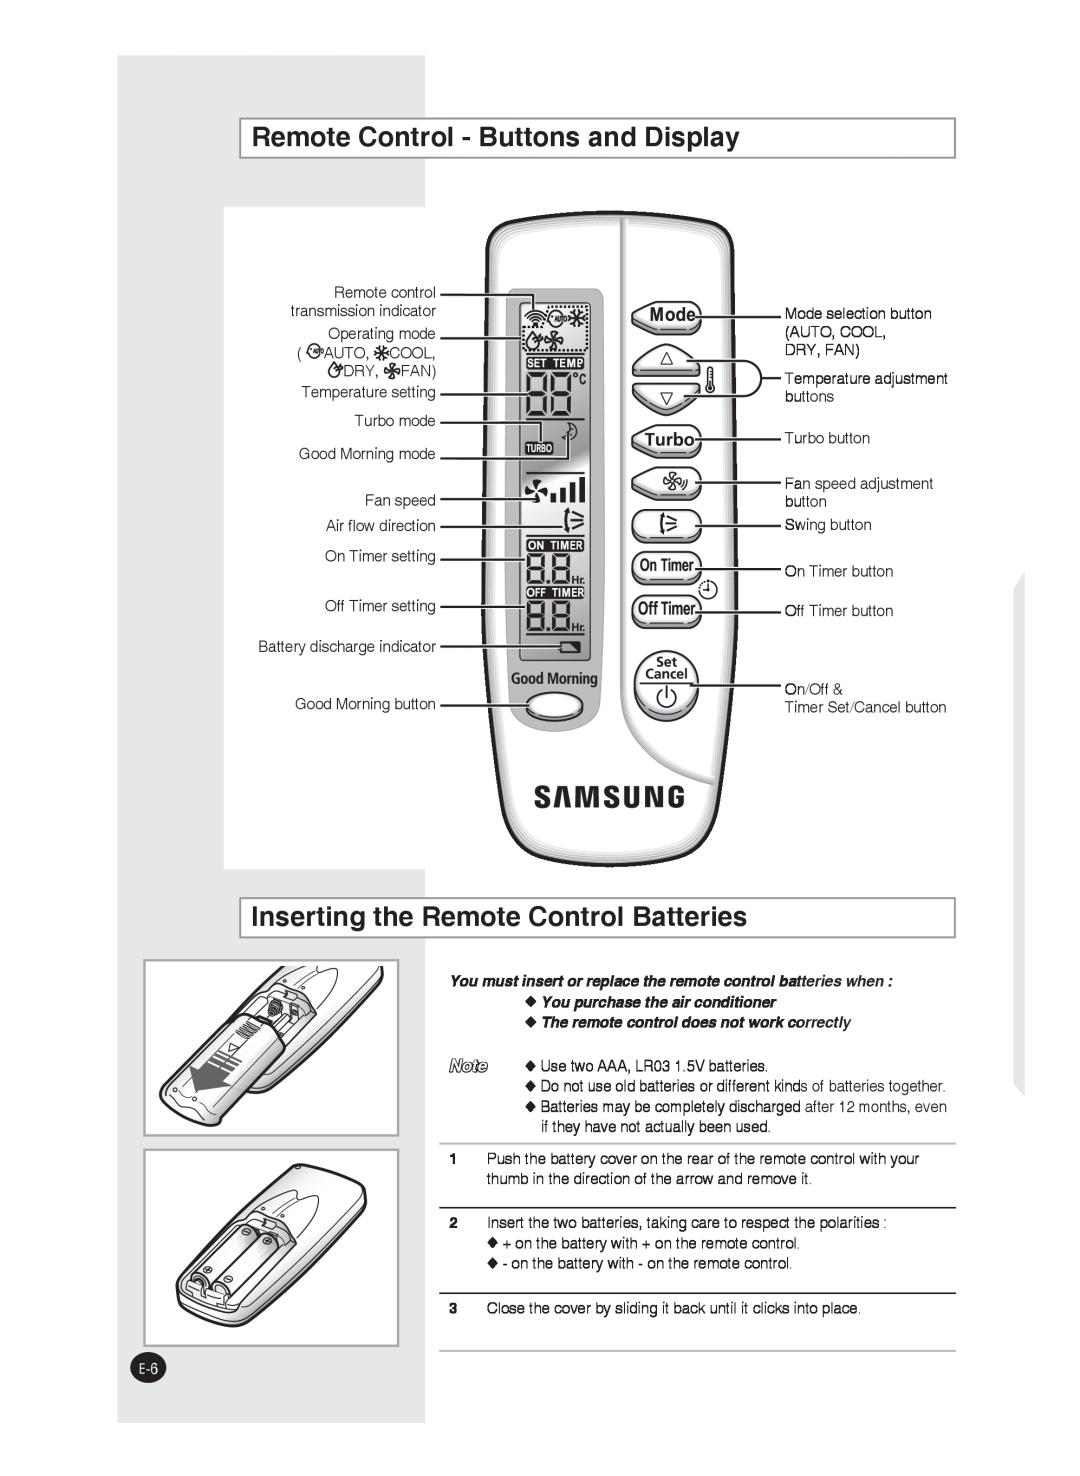 Samsung AS12W, AS09F, AS24J, AS24W, AS24F, AS18J Remote Control - Buttons and Display, Inserting the Remote Control Batteries 